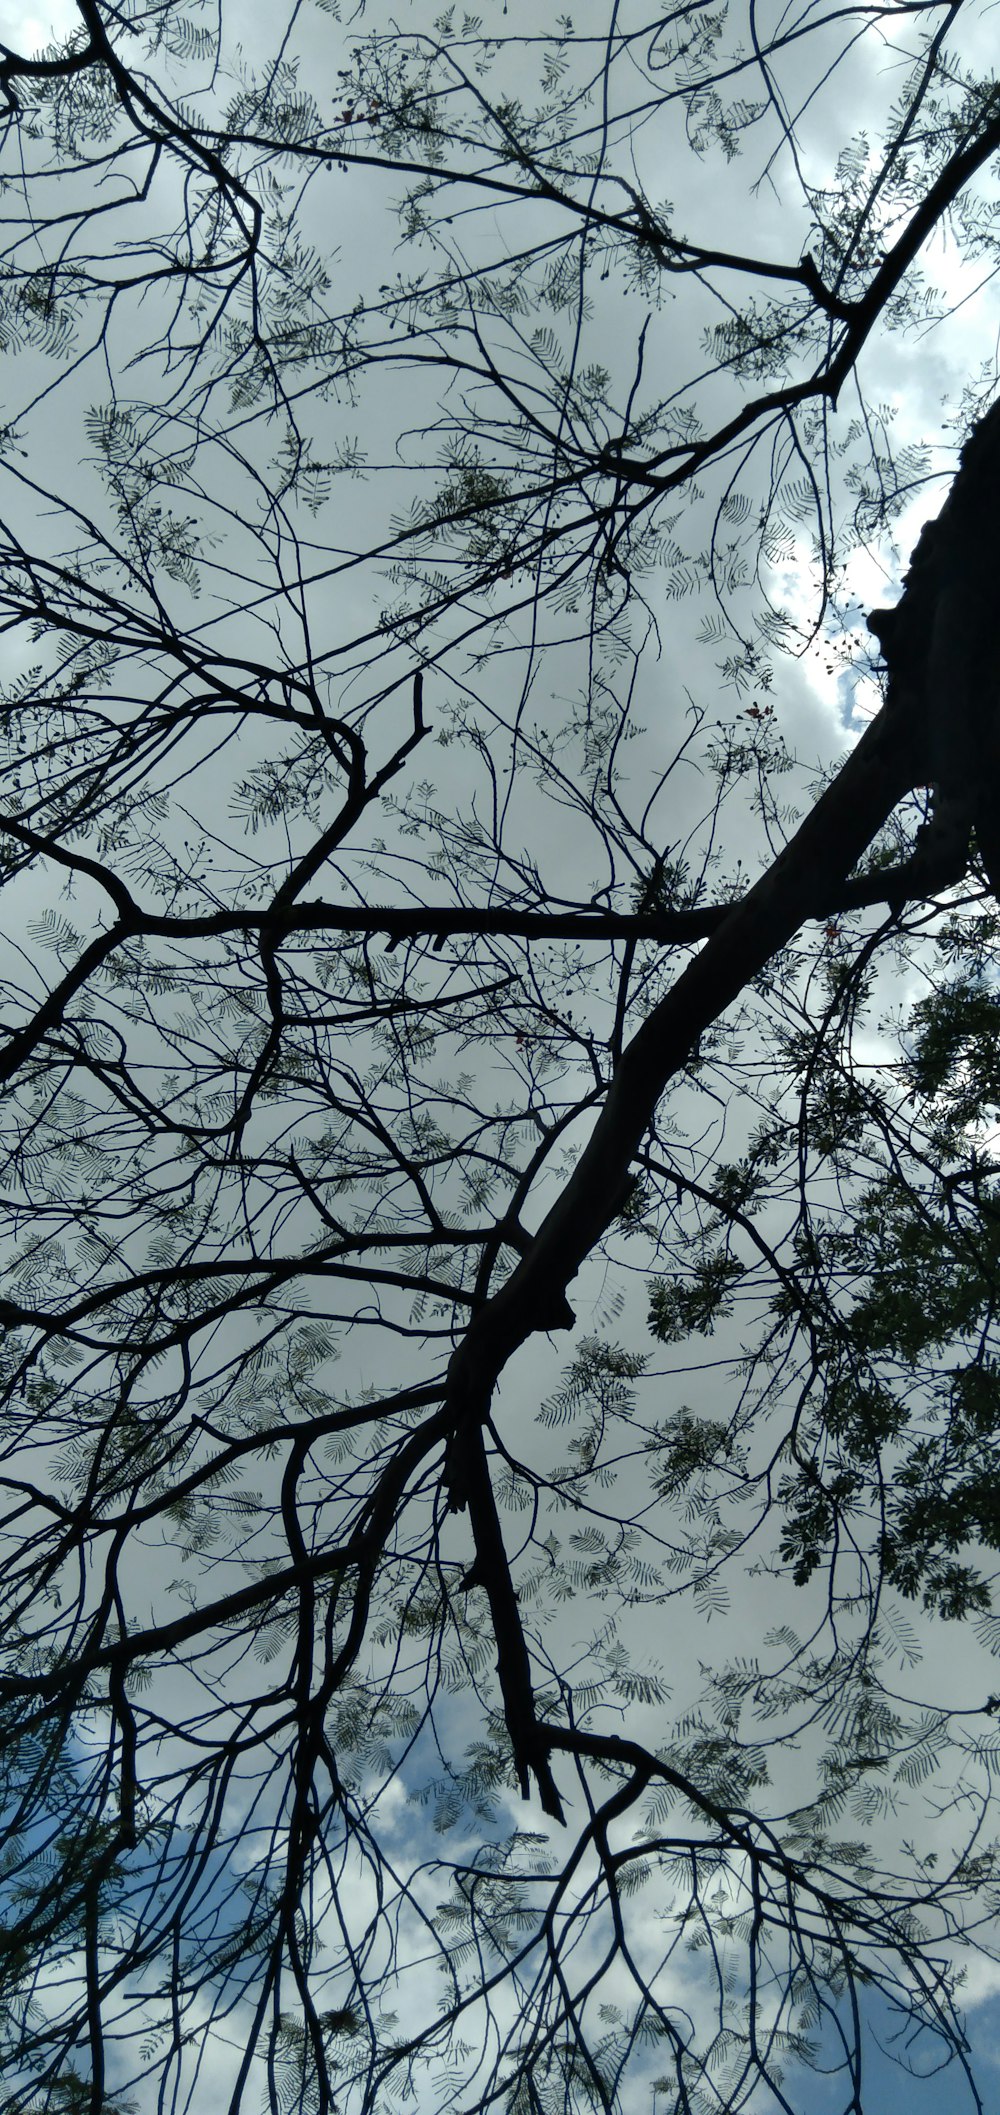 looking up at the branches of a tree against a cloudy sky